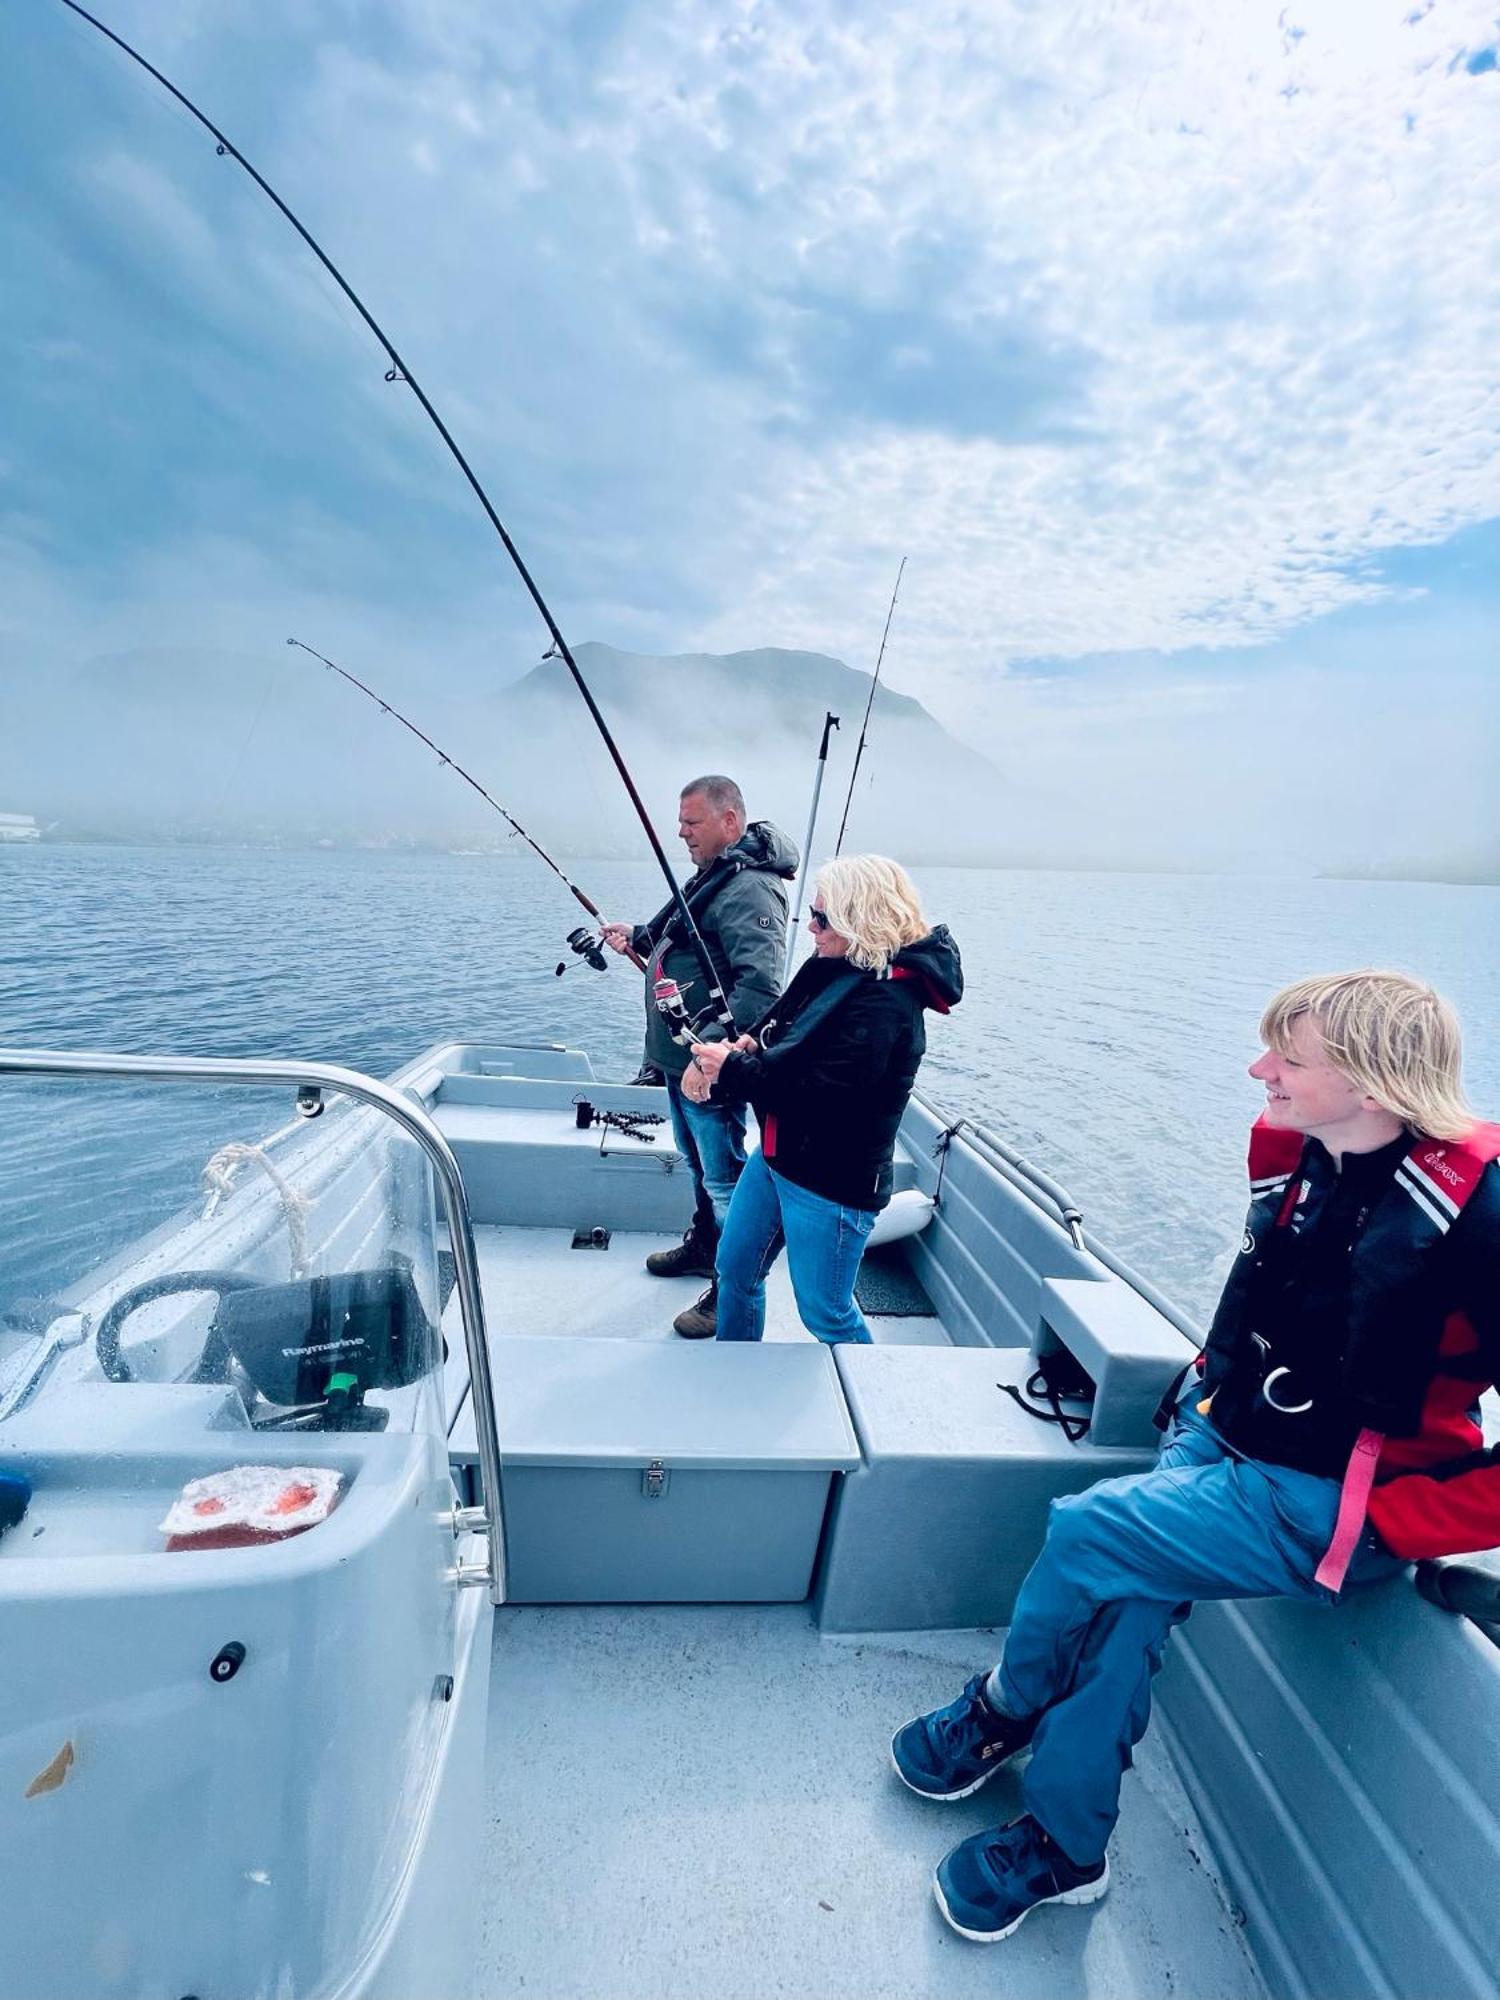 Awesome Fishing, Boating And Nature Experience At Fiskesenter Birkeland Rekdal 外观 照片